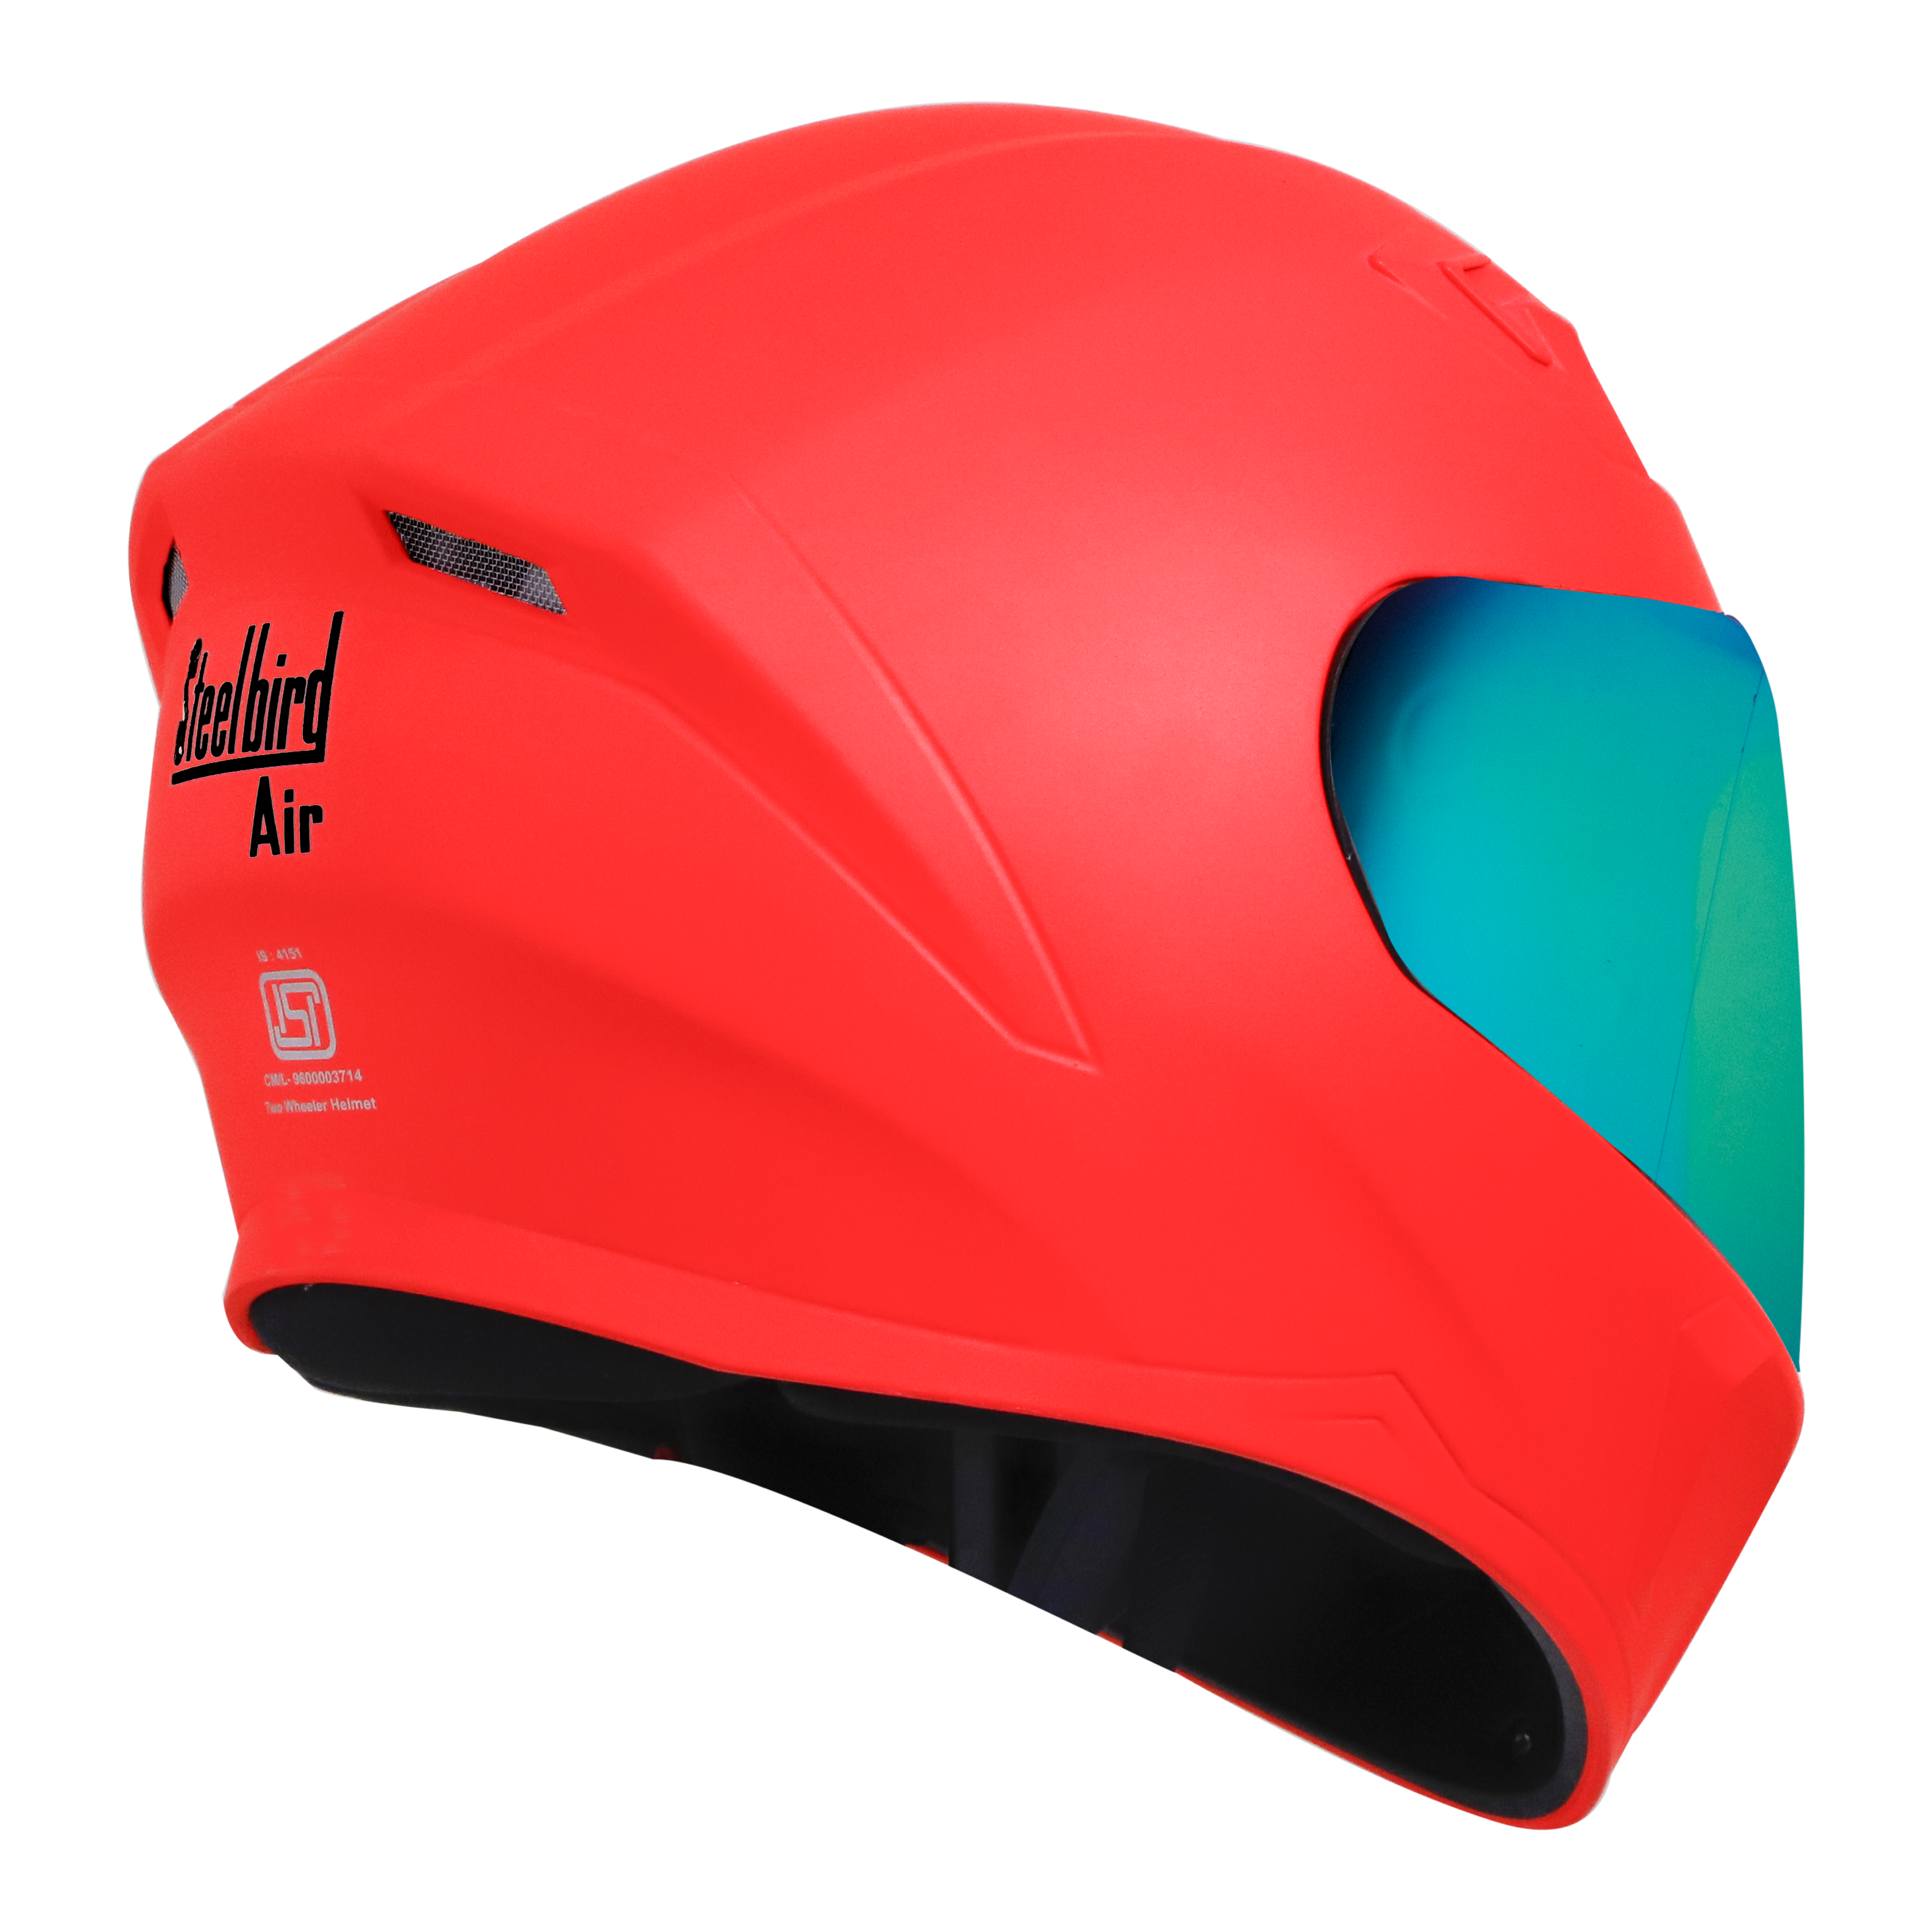 SBA-21 VFX GLOSSY FLUO WATERMELON ( FITTED WITH CLEAR VISOR EXTRA CHROME RAINBOW VISOR FREE)